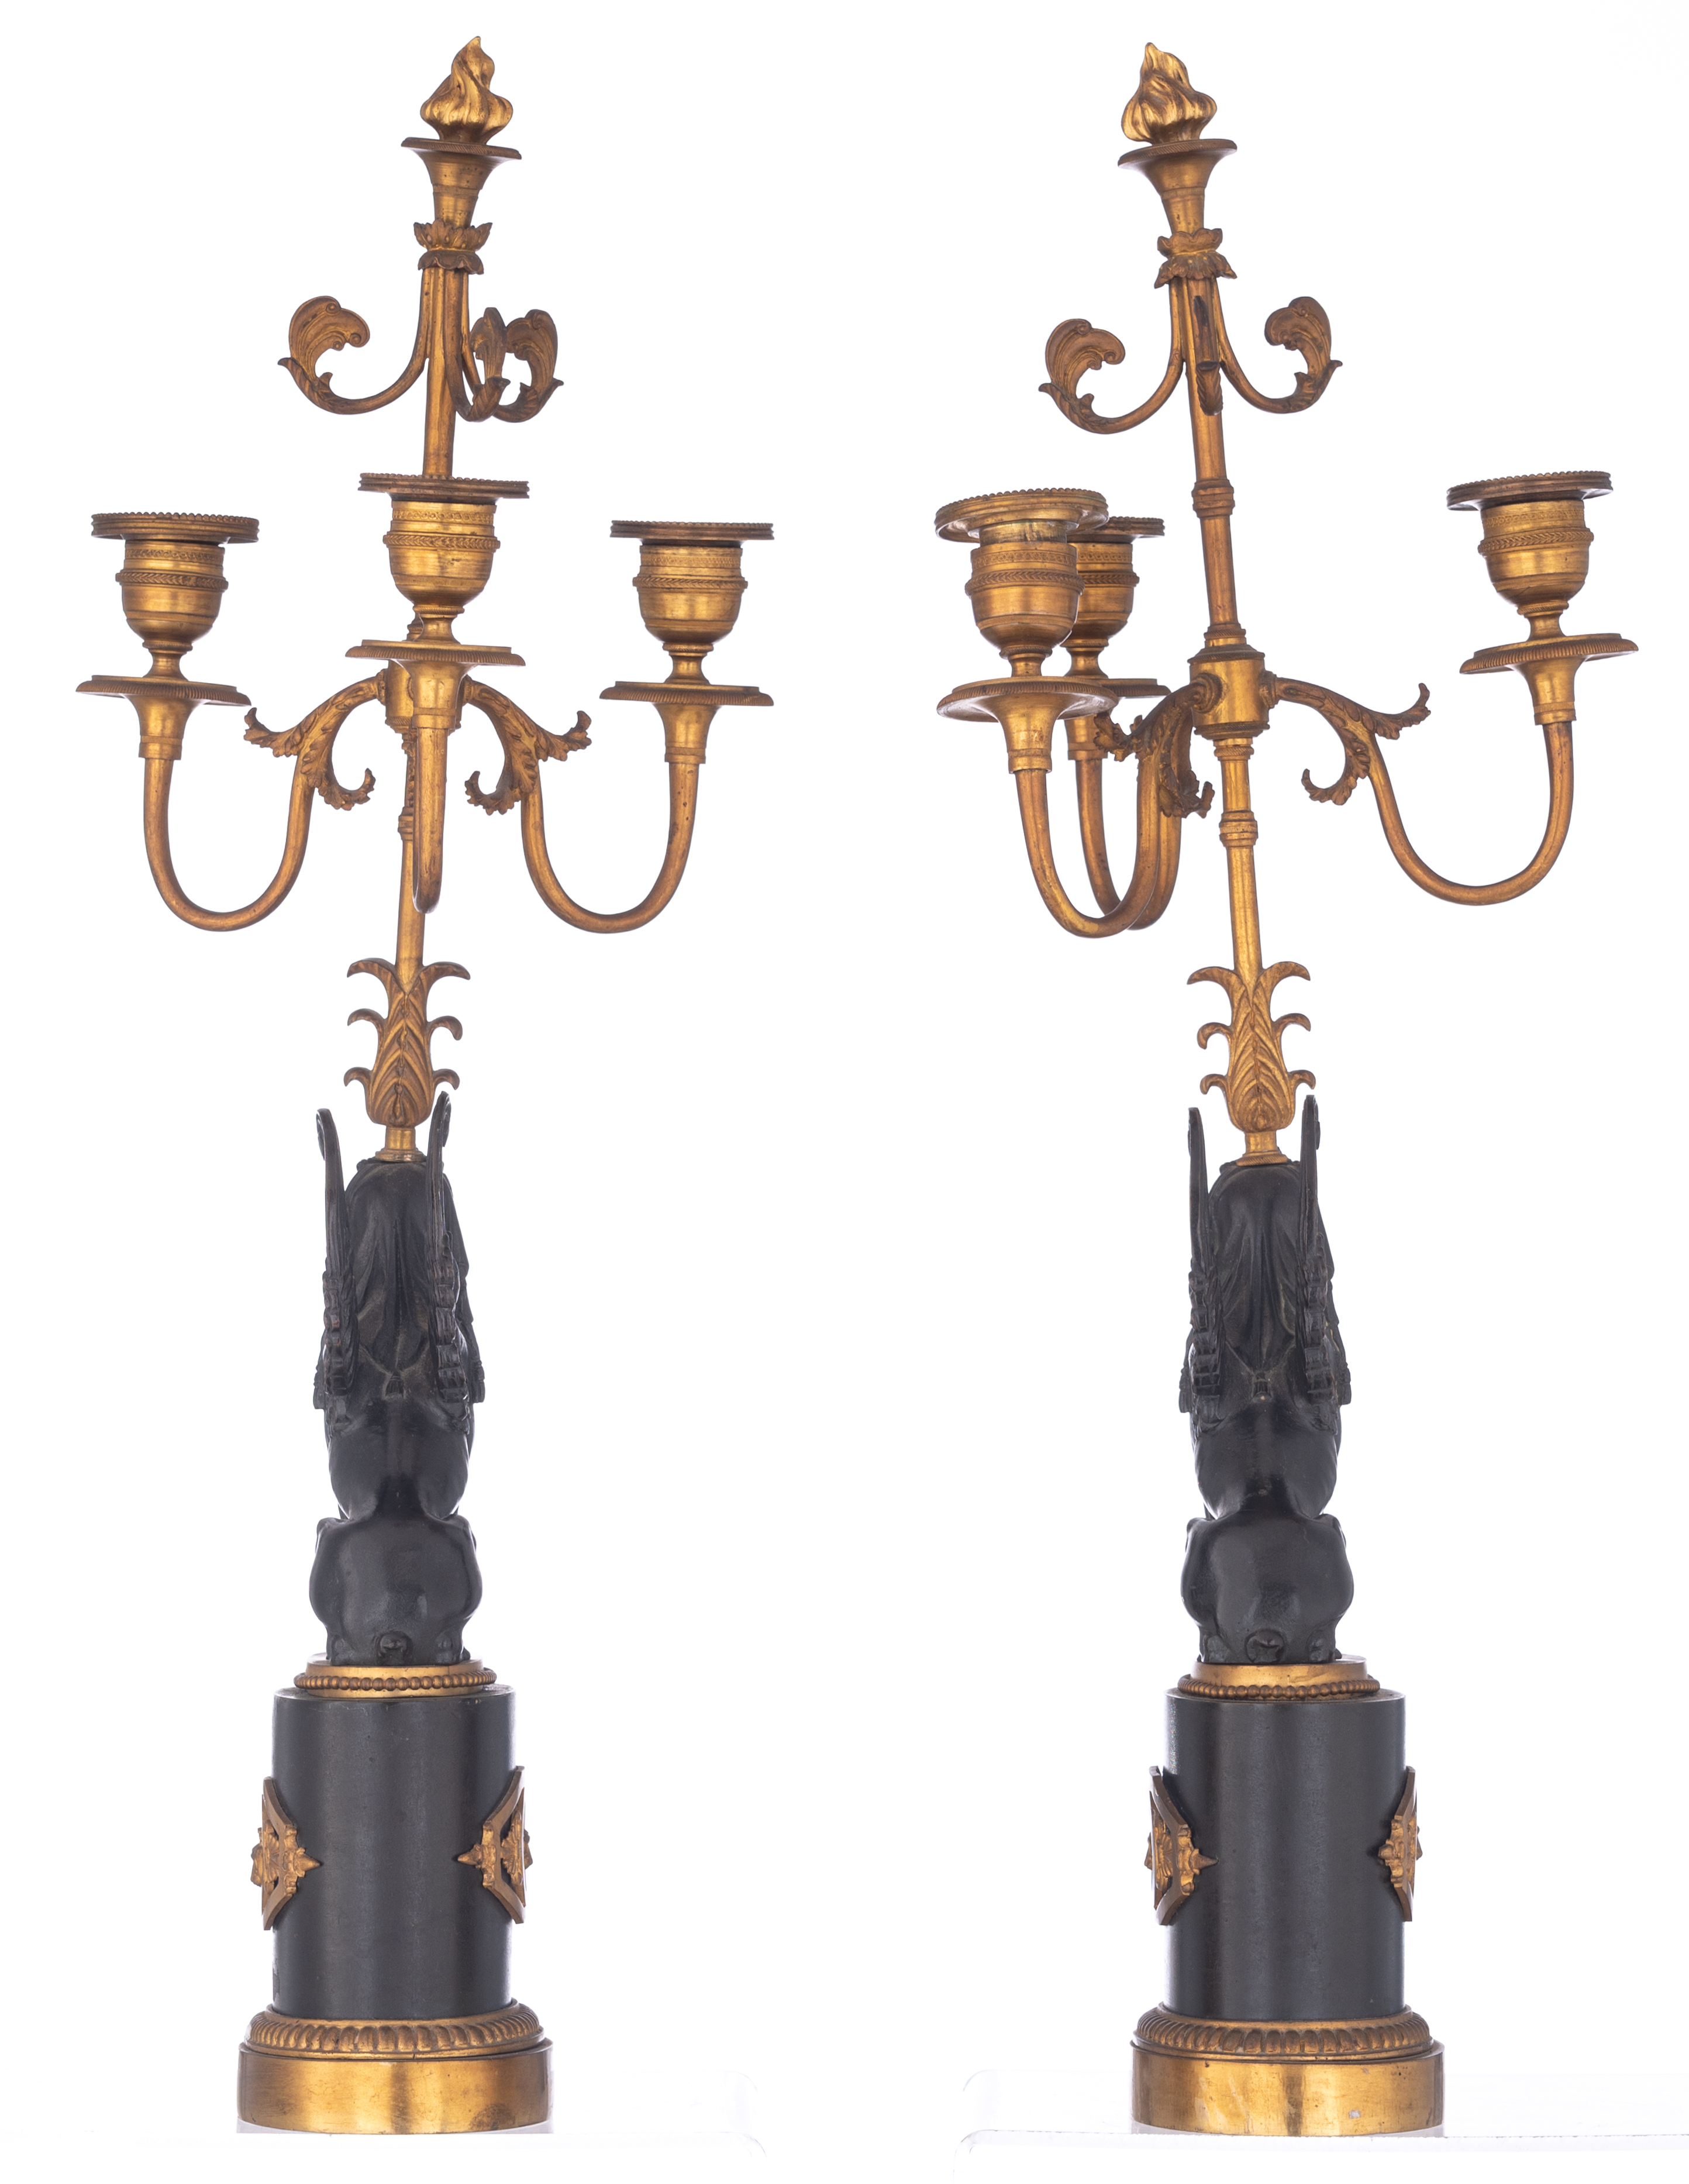 A pair of Empire style sphinx-shaped candelabras, H 52 cm - Image 2 of 5